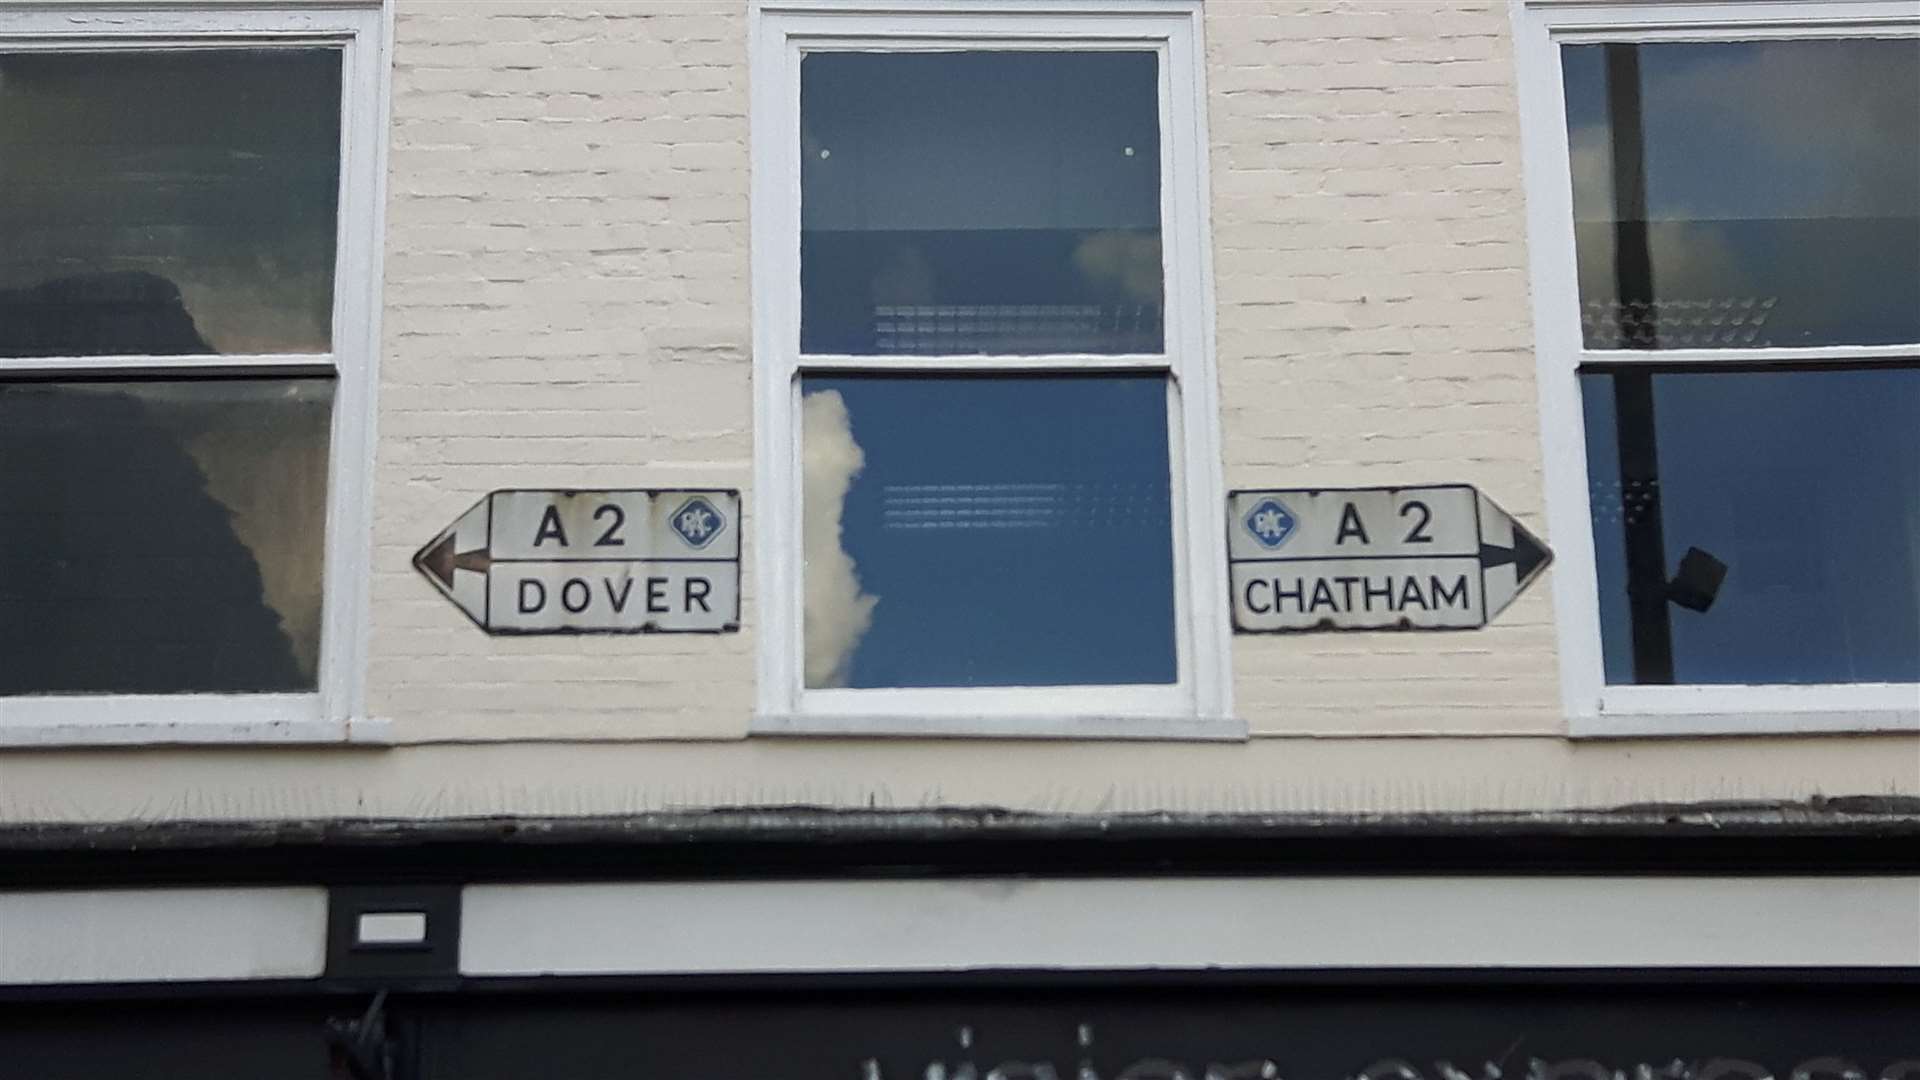 A reminder of when Canterbury high street was part of the main A2 route from London to Dover